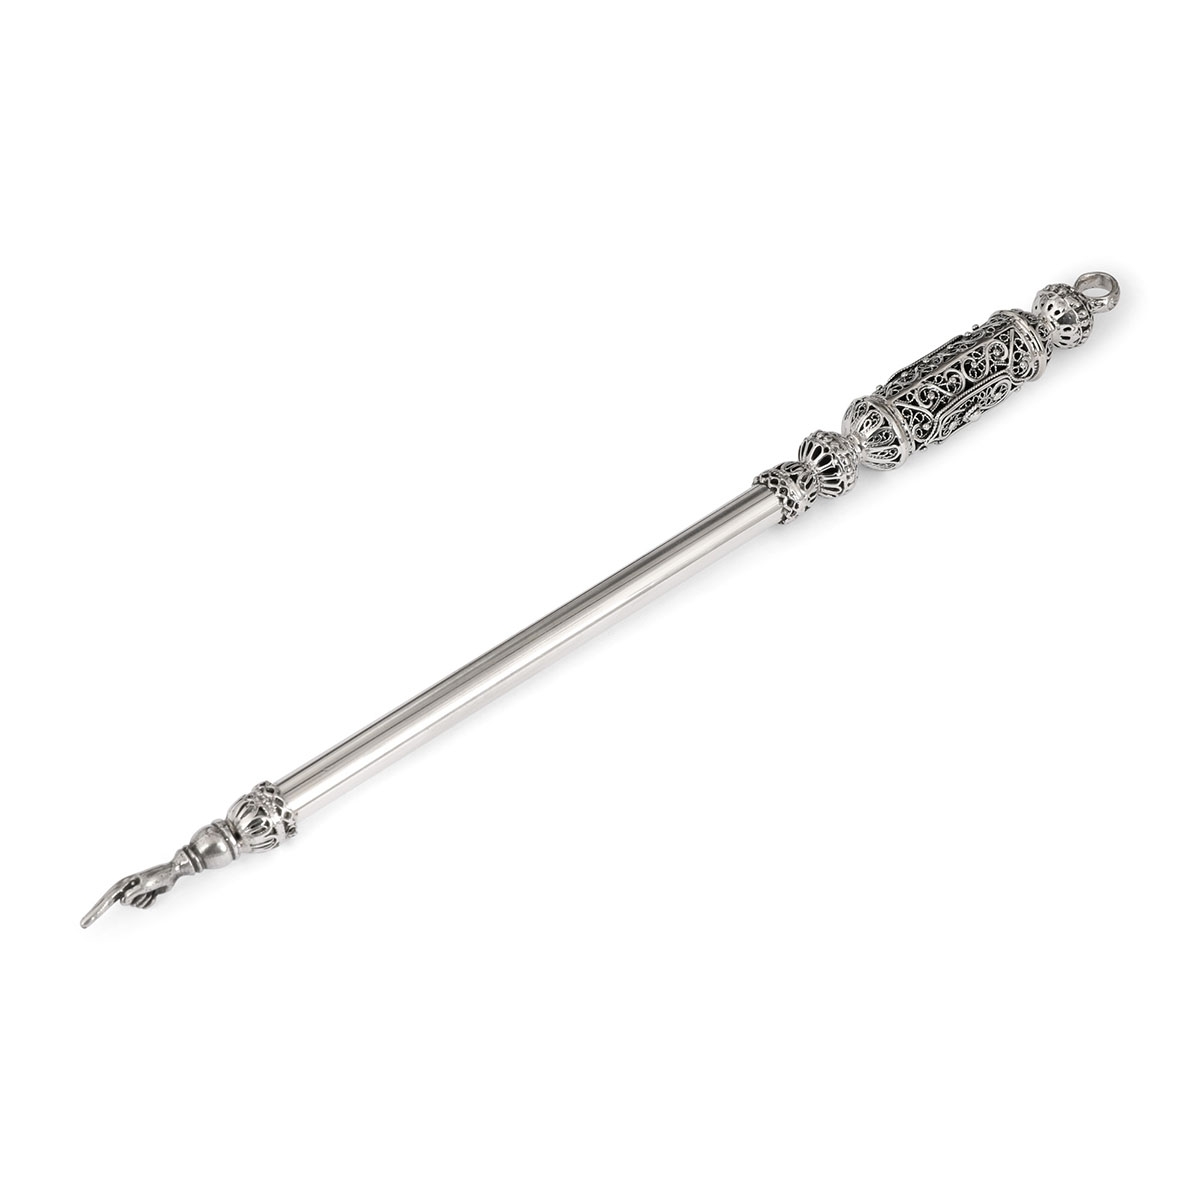 Traditional Yemenite Art Handcrafted Sterling Silver Yad (Torah Pointer) With Filigree Design - 1